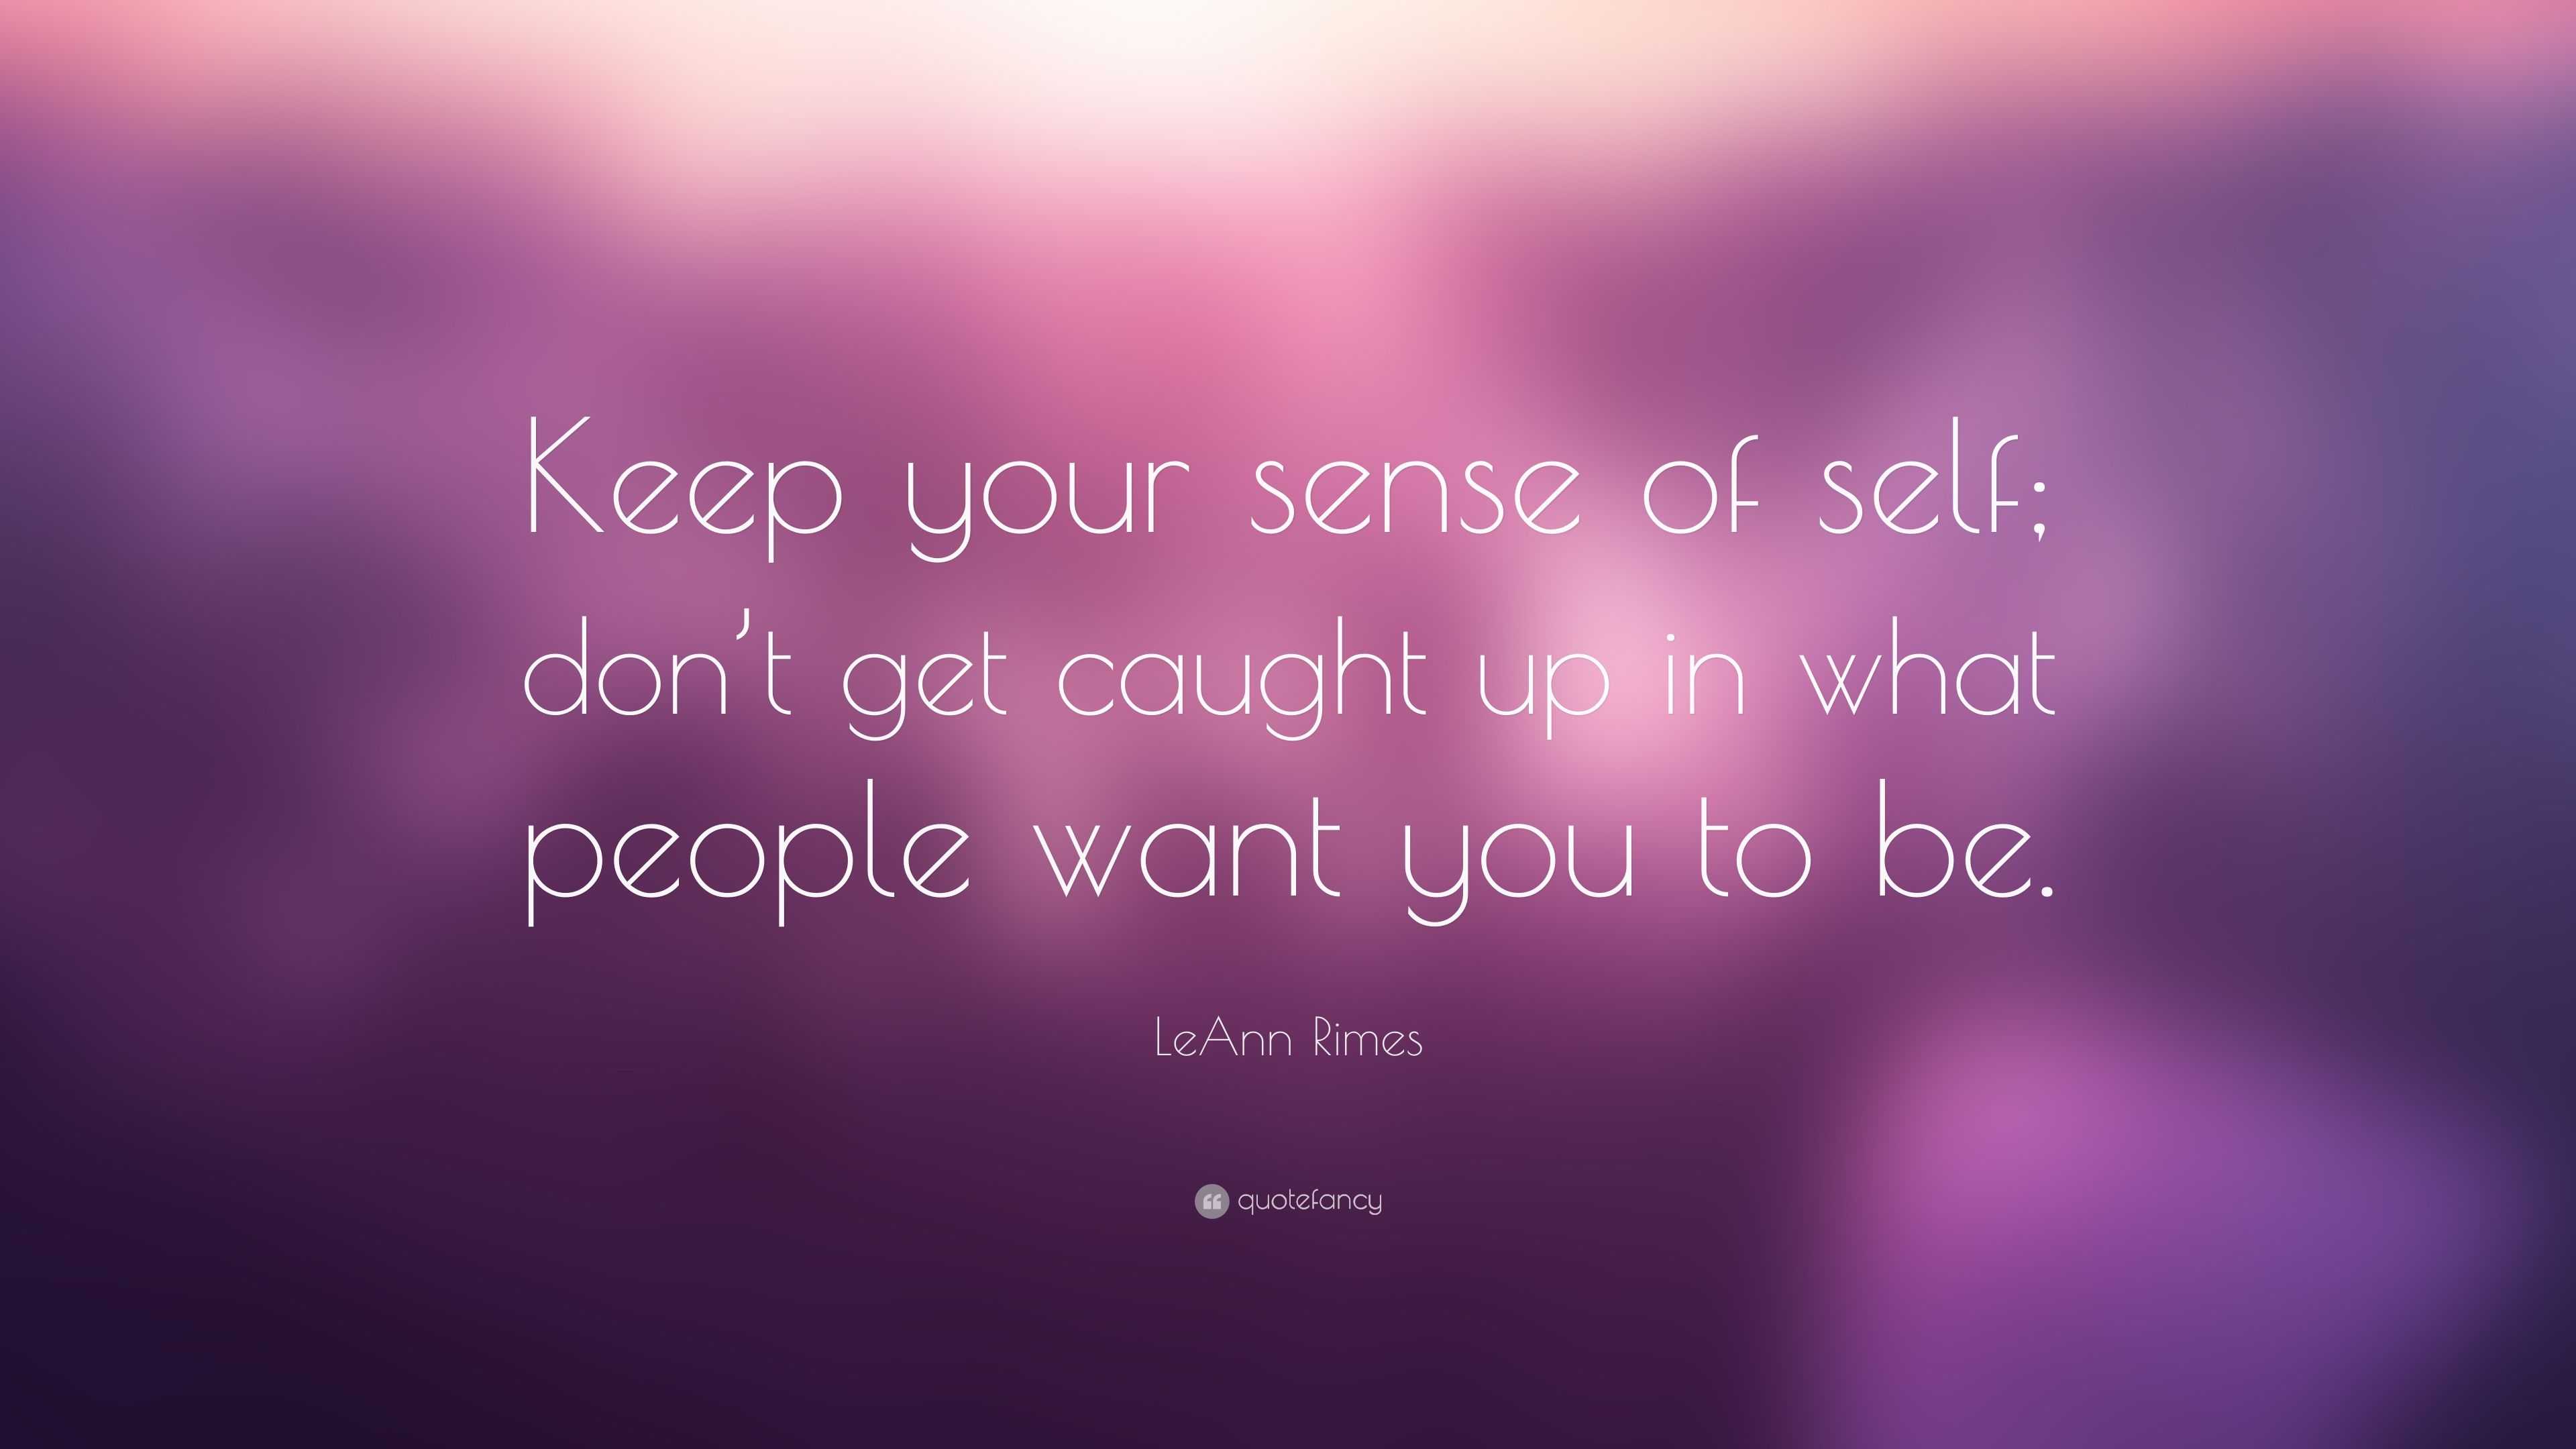 Leann Rimes Quote “keep Your Sense Of Self Dont Get Caught Up In What People Want You To Be” 